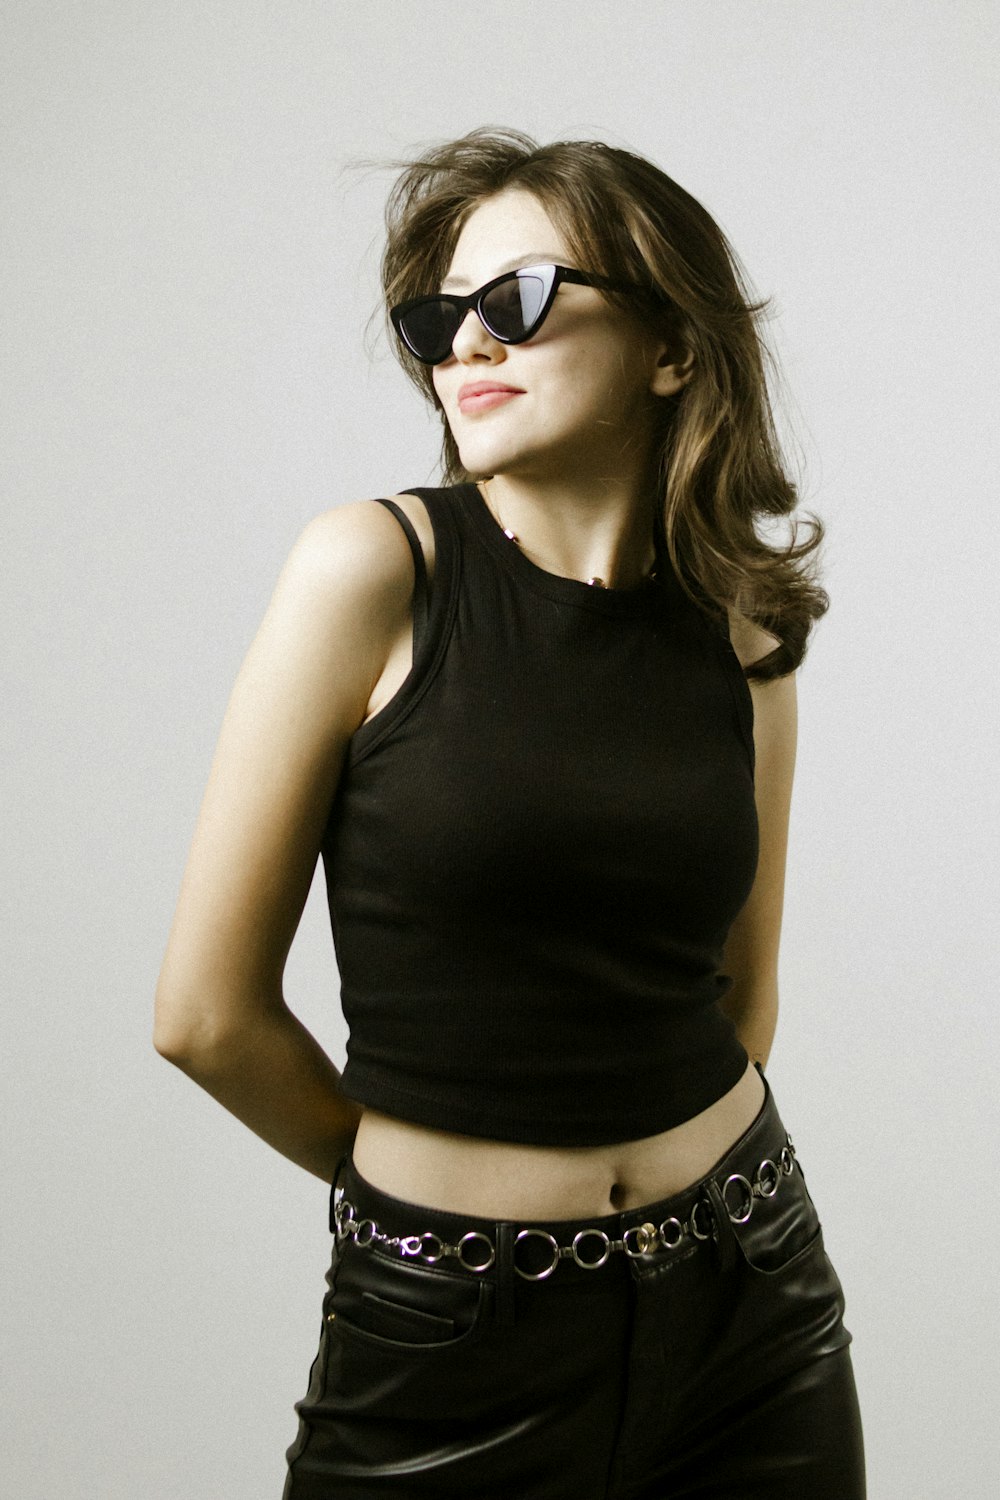 a woman wearing a black top and sunglasses